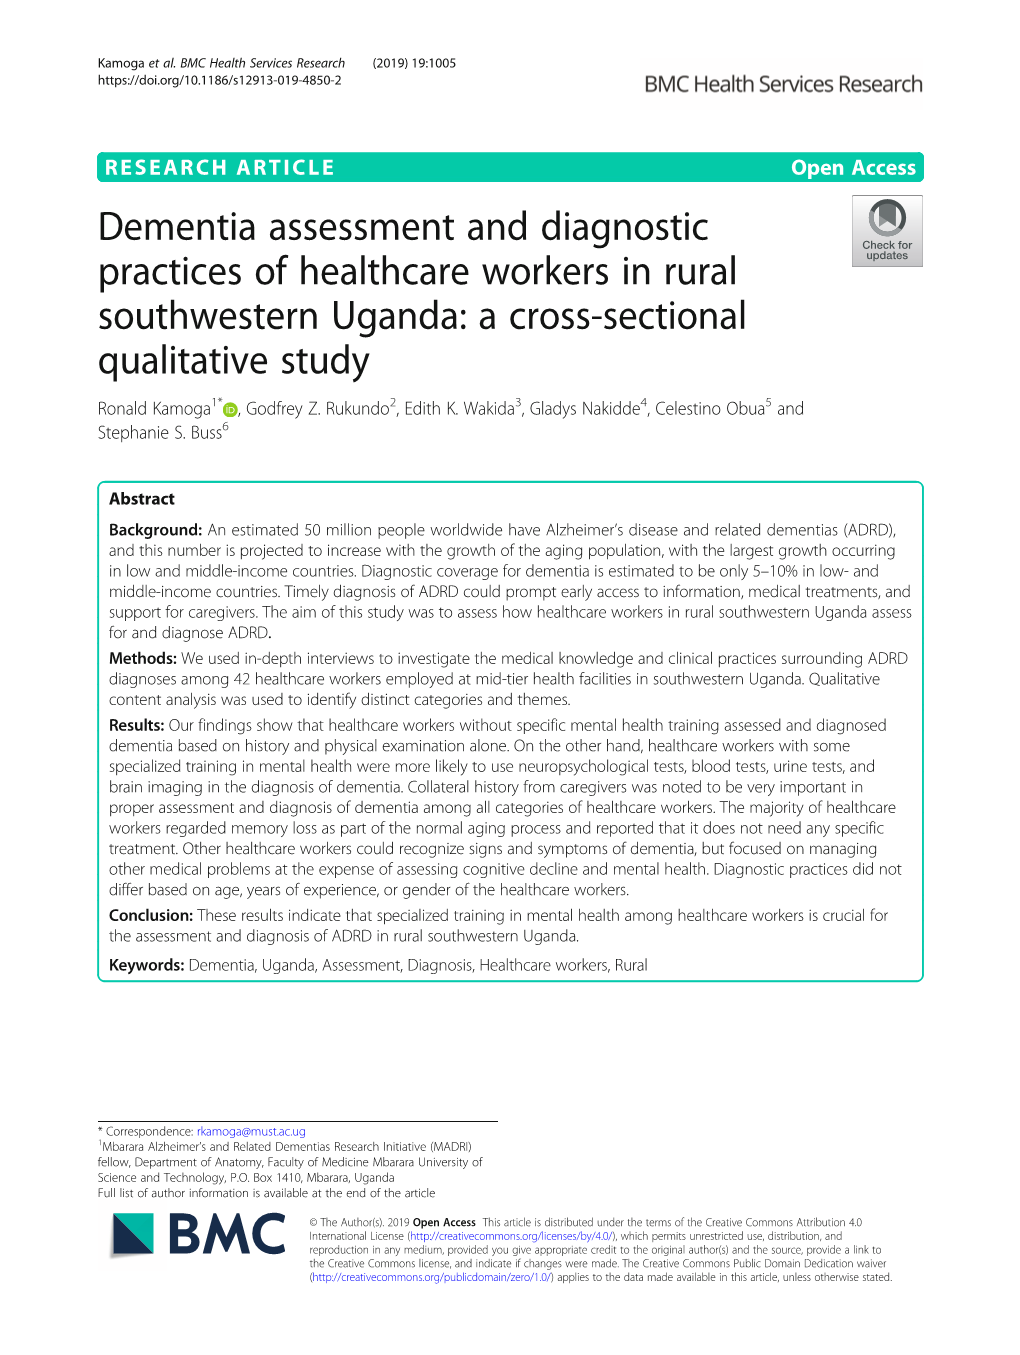 Dementia Assessment and Diagnostic Practices of Healthcare Workers in Rural Southwestern Uganda: a Cross-Sectional Qualitative Study Ronald Kamoga1* , Godfrey Z